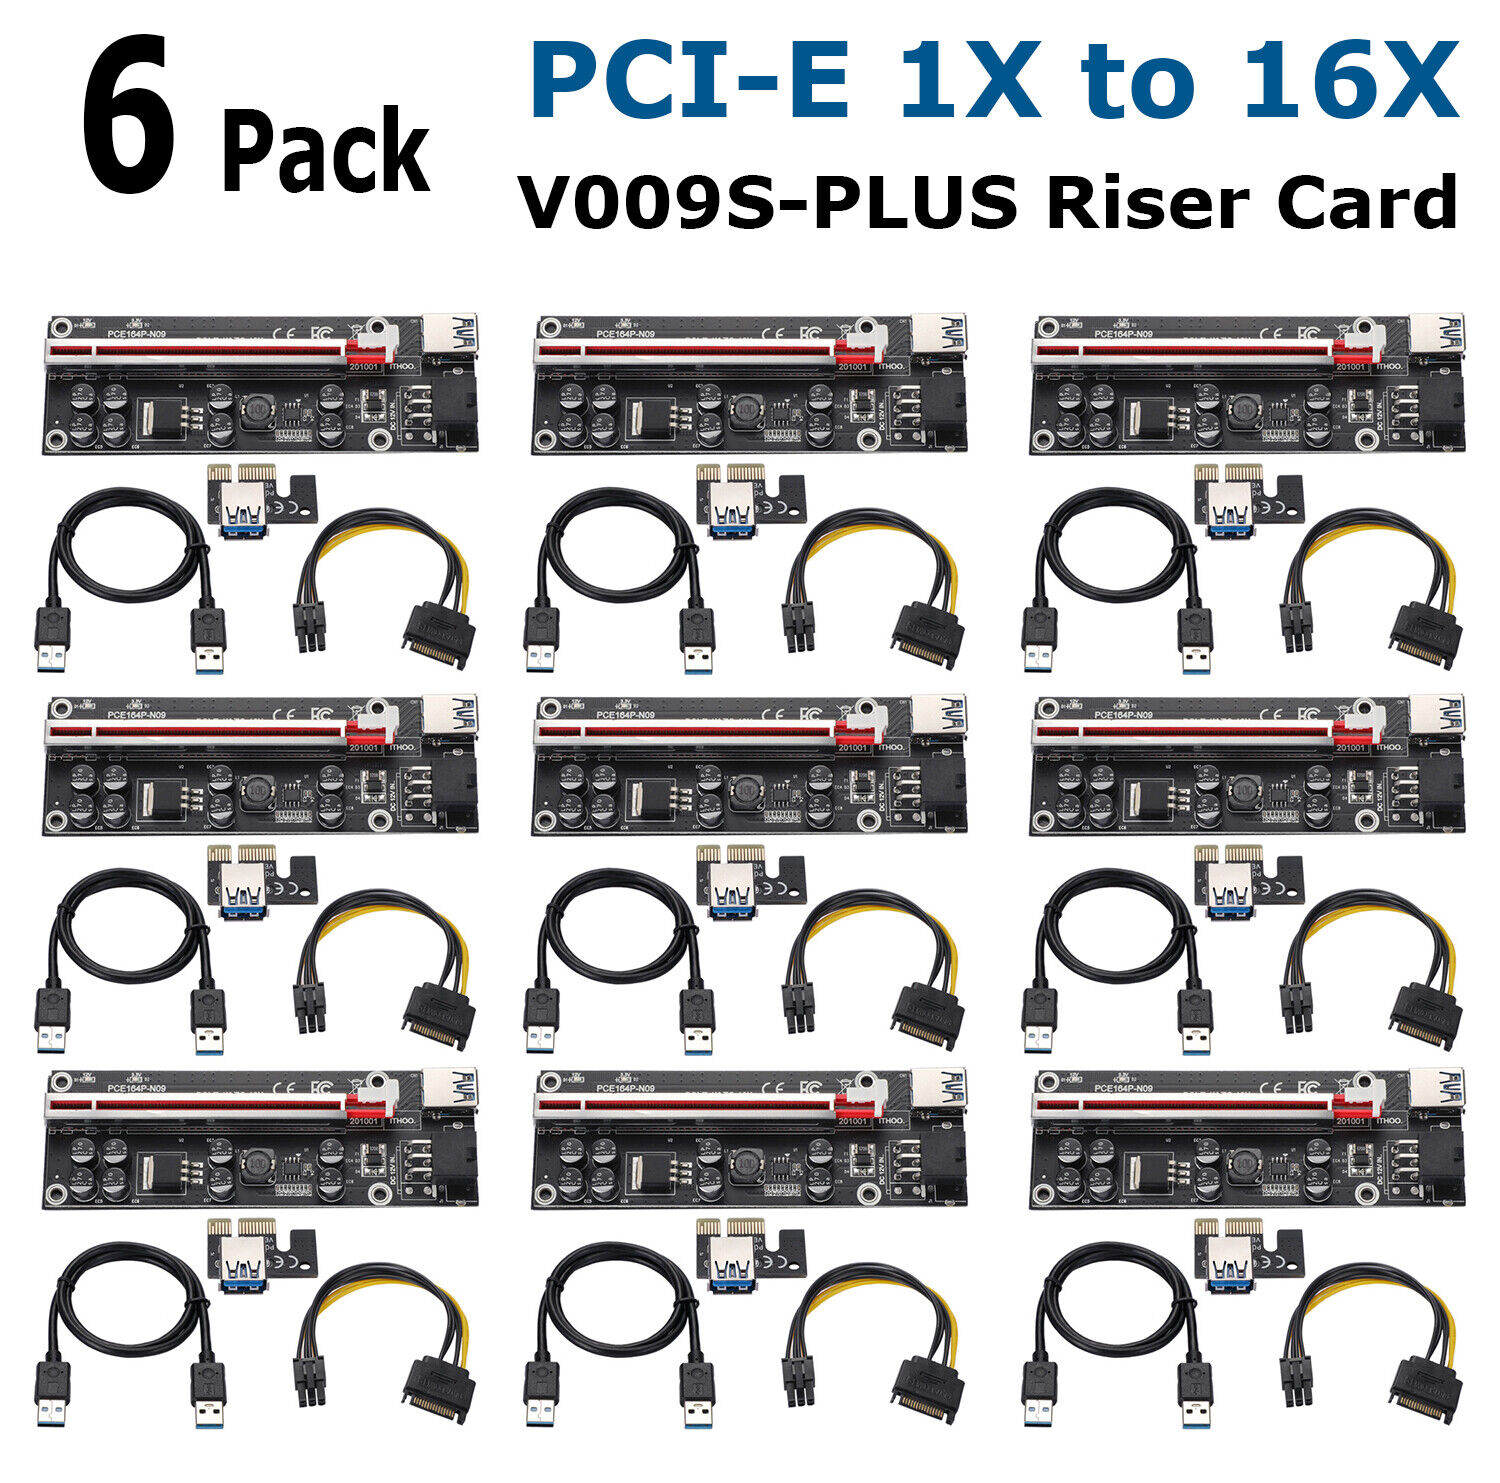 PCI-E 1X to 16X Expansion Card for Aleo 3.0 Ethernet ETH Bitcoin Mining Devices